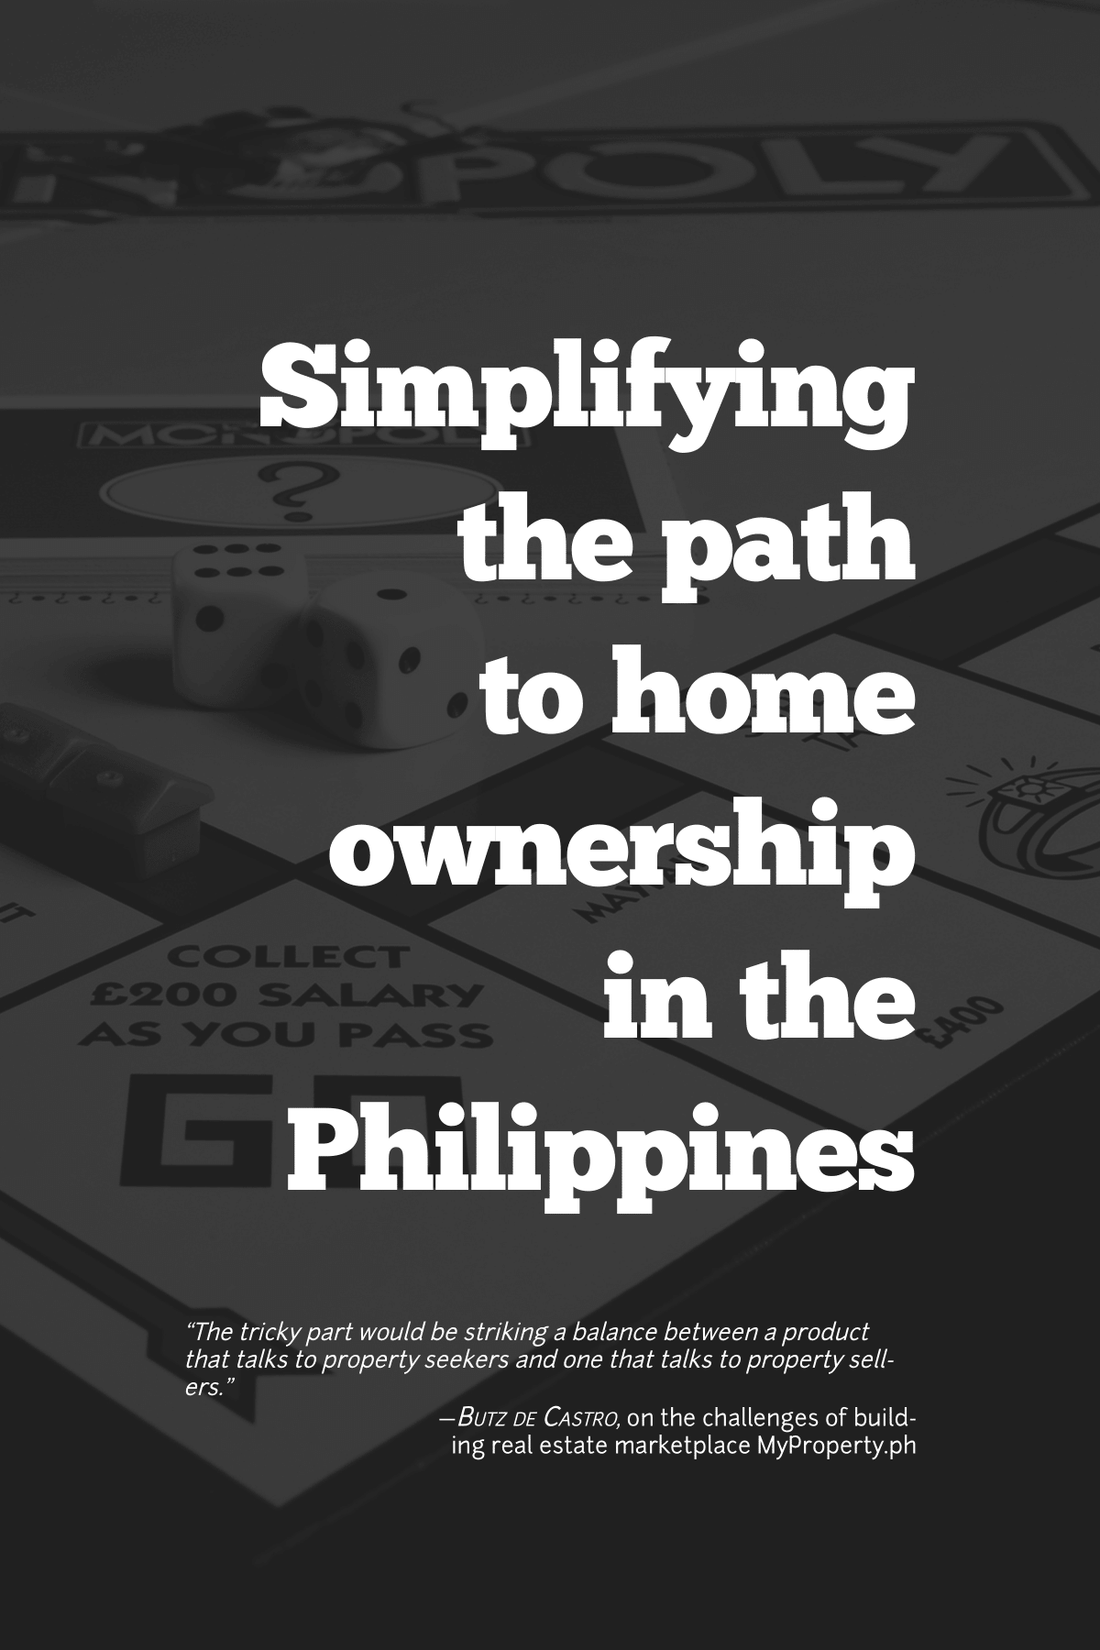 Simplifying the path to home ownership in the Philippines